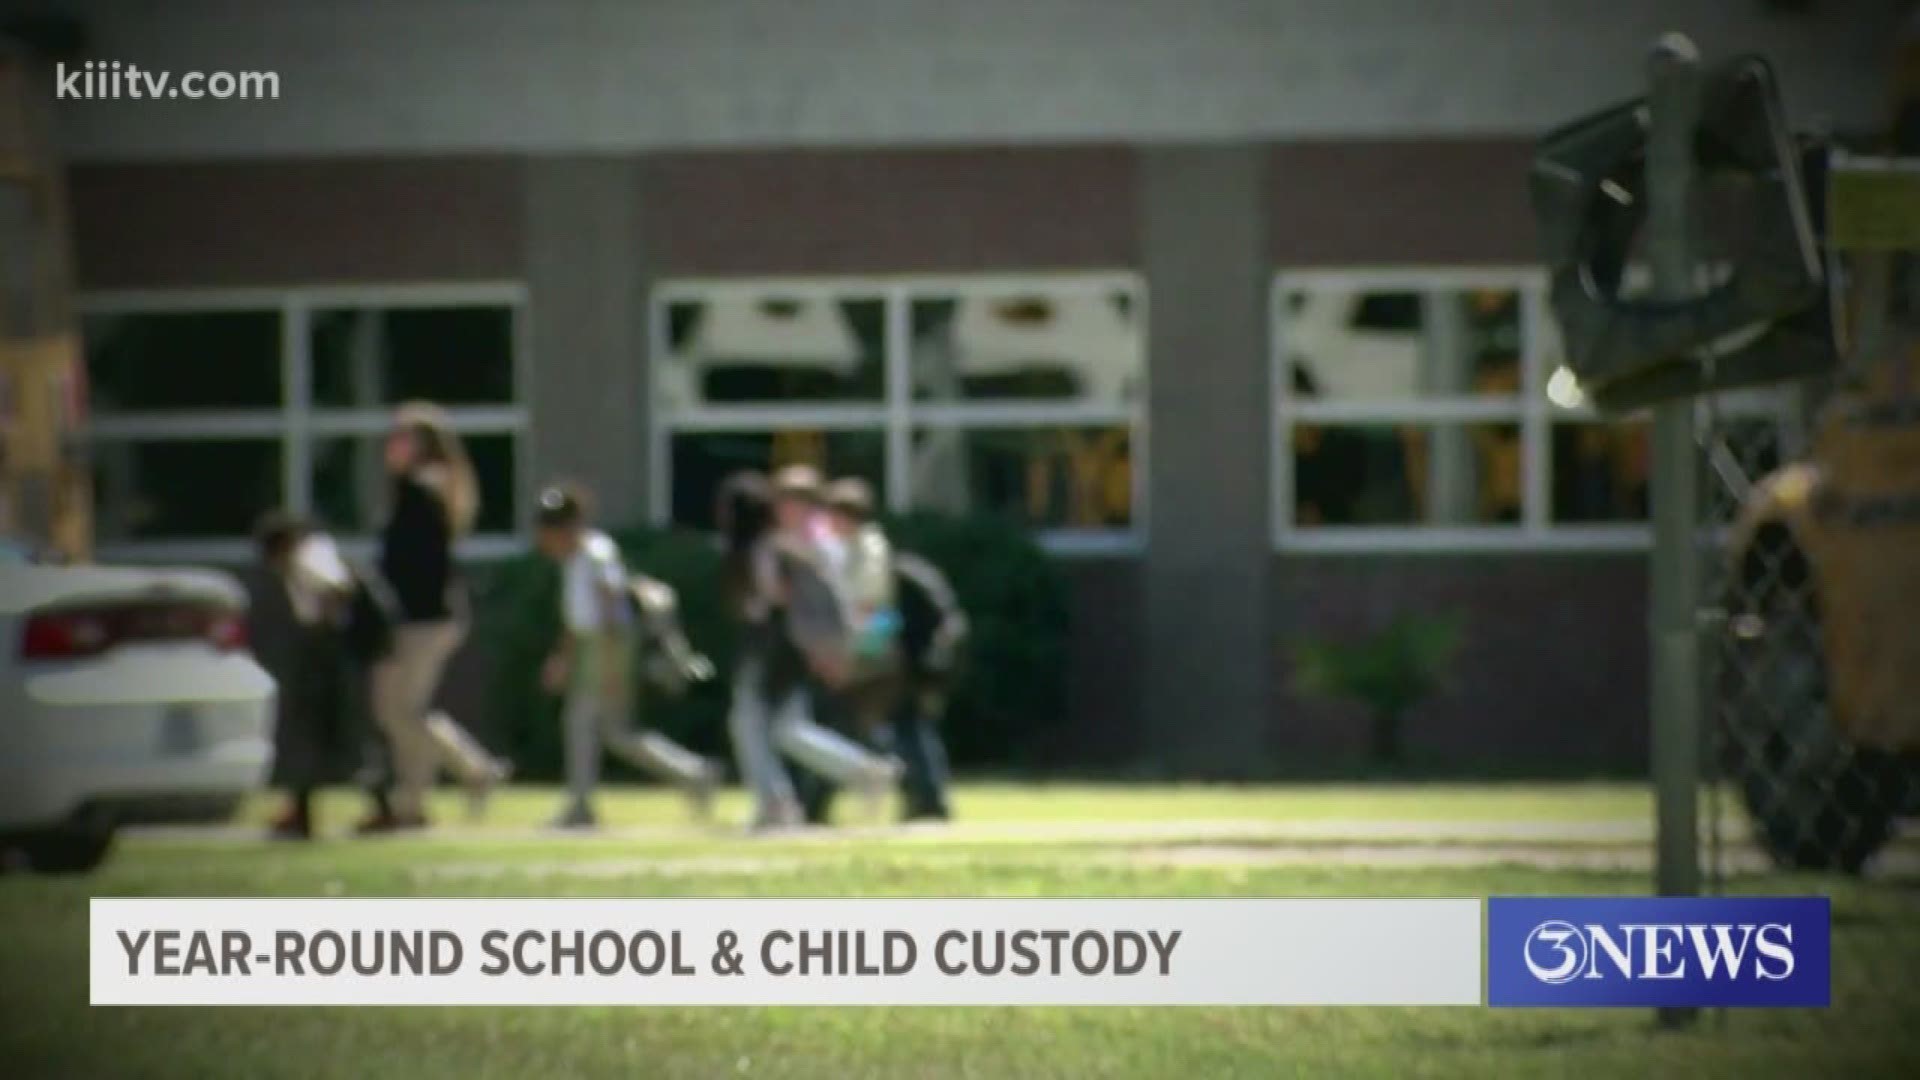 Child custody agreements could be called into question after the Corpus Christi ISD announced it's going to a year-round school calendar for 2020-2021.